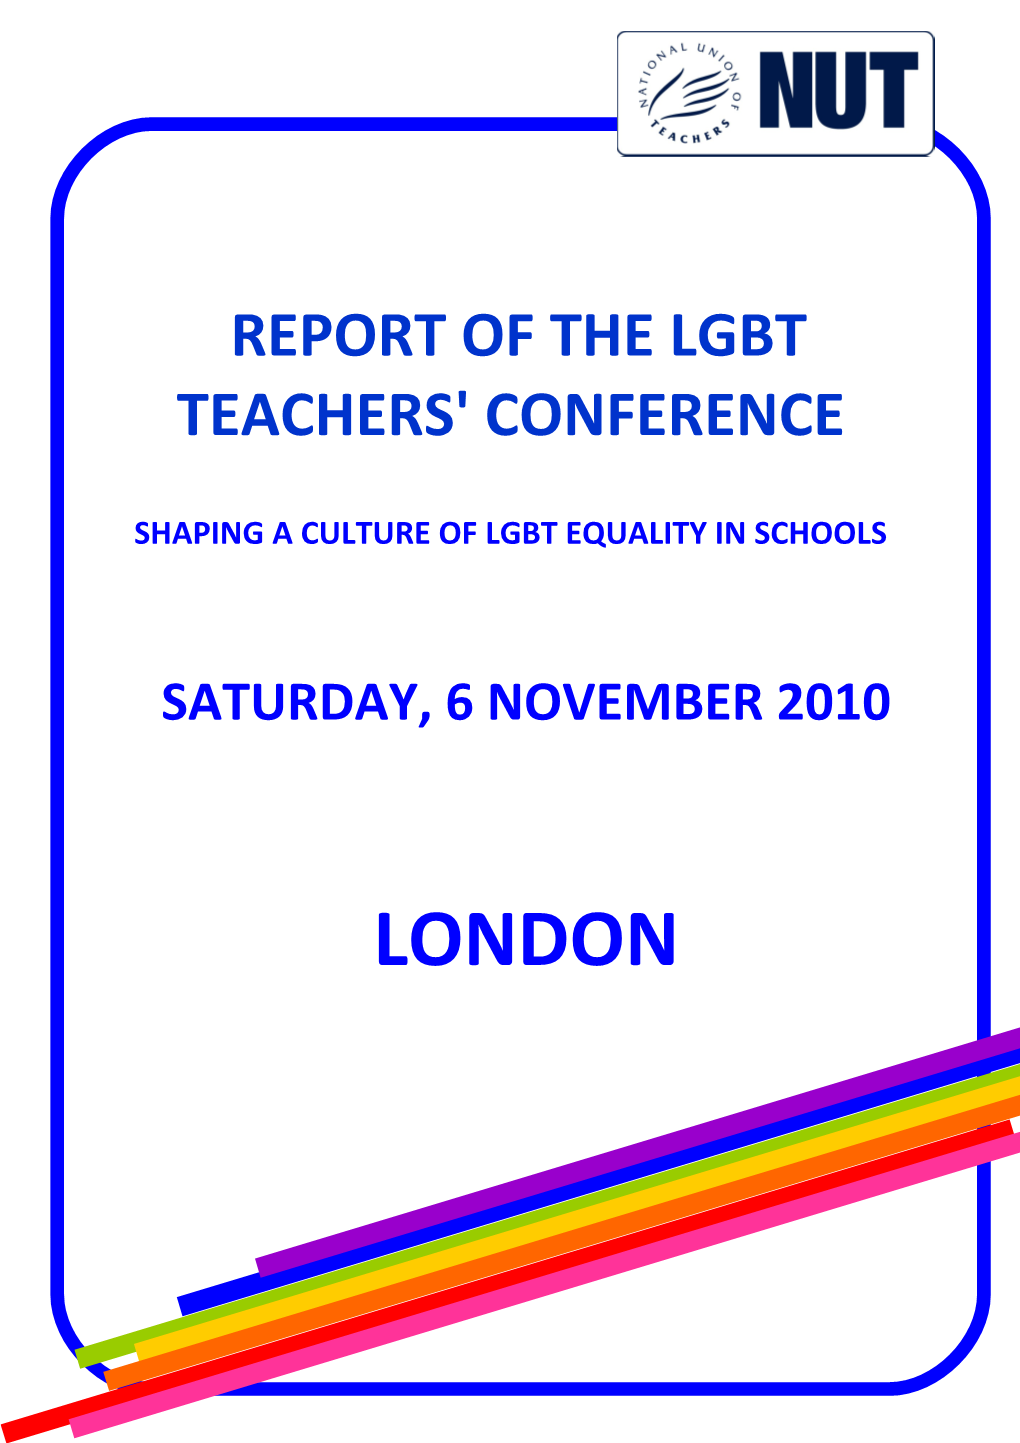 Report of the Lgbt Teachers Conference Held on Saturday, 6 November 2010